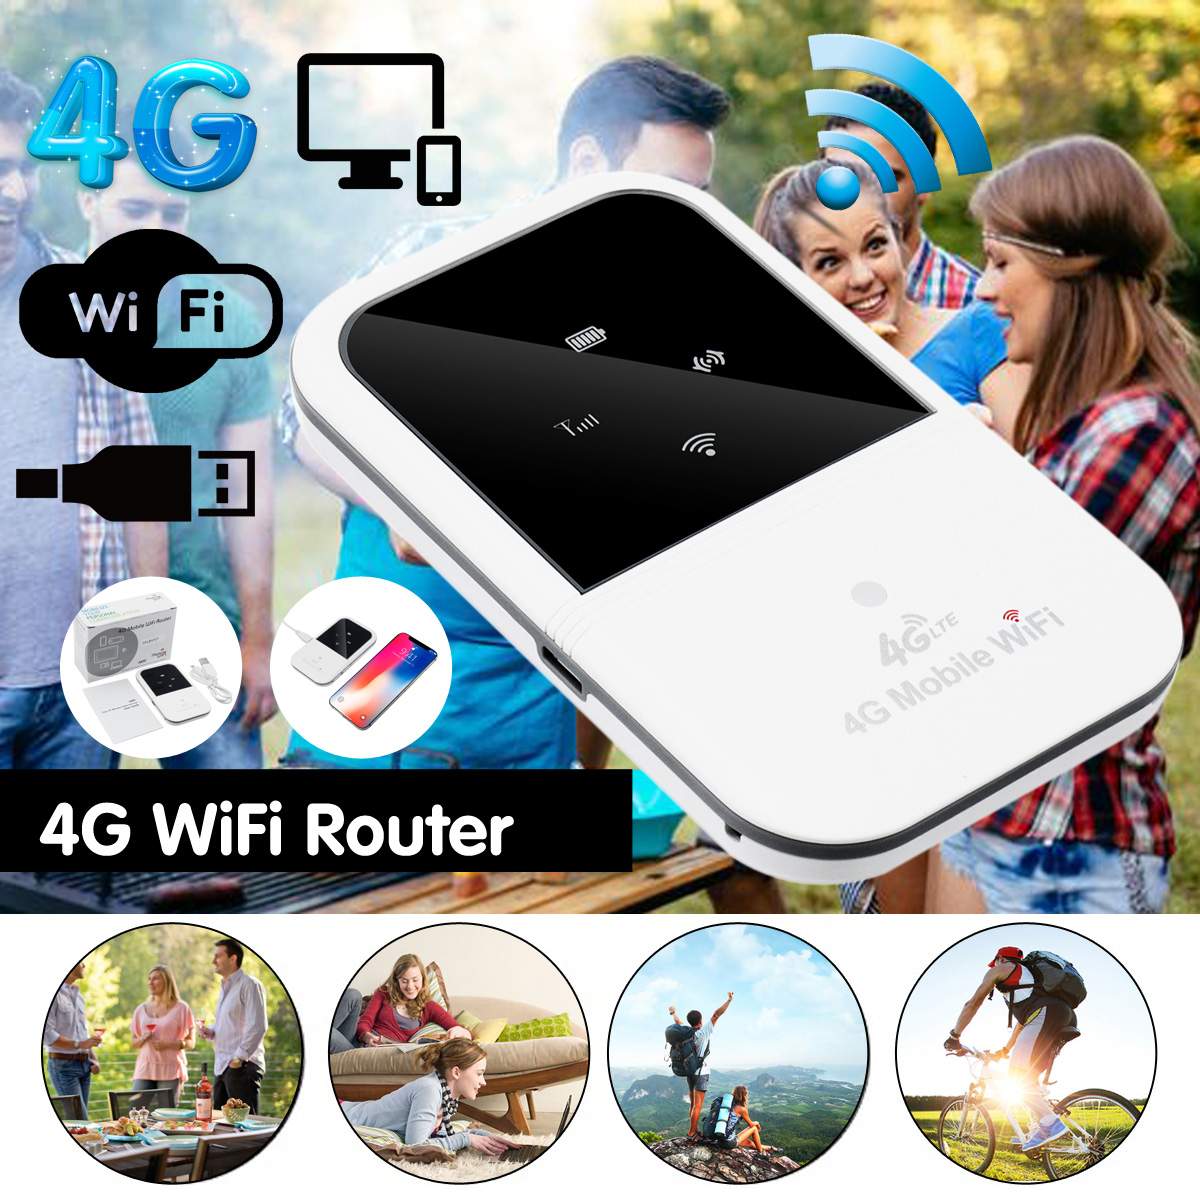 A800 4G Draadloze Router Draagbare WiFi 802.11 b/g/n 4G 150Mbps Draagbare Router 4G Hotspot Met SIM Slot Draadloze Routers Repeater